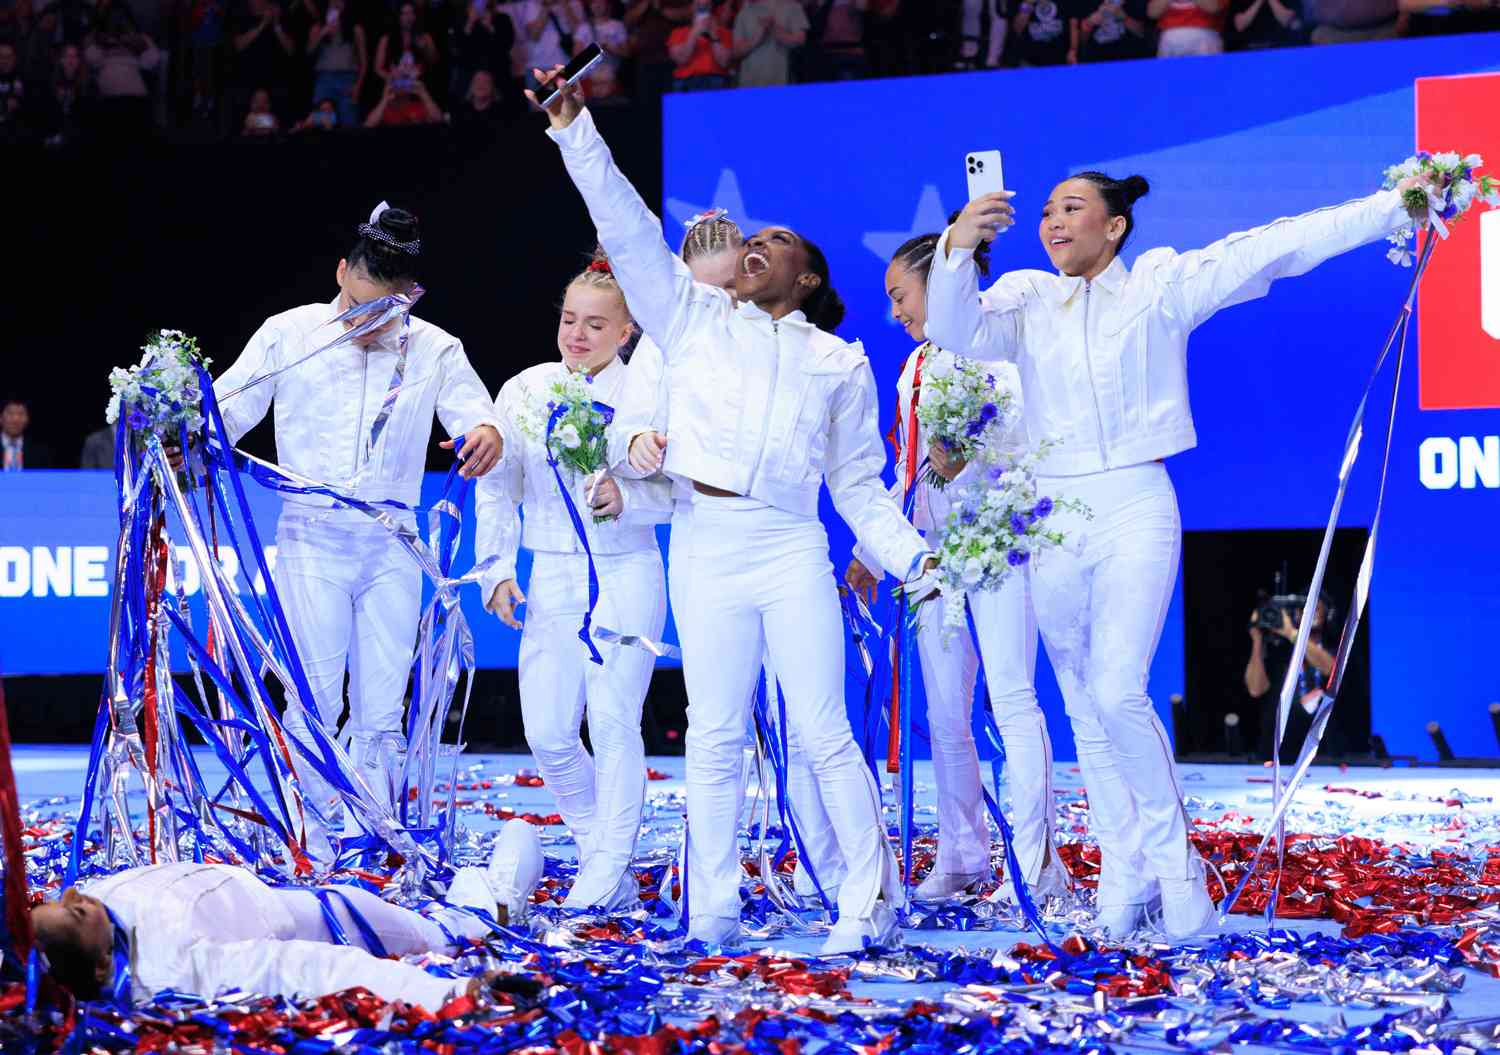 Jordan Chiles, Leanne Wong (alternate), Joscelyn Roberson (alternate), Jade Carey, Simone Biles, Hezly Rivera, and Suni Lee stand after being named at the U.S. Olympic Team for women's gymnastics at Target Center in Minneapolis, United States on June 30, 2024